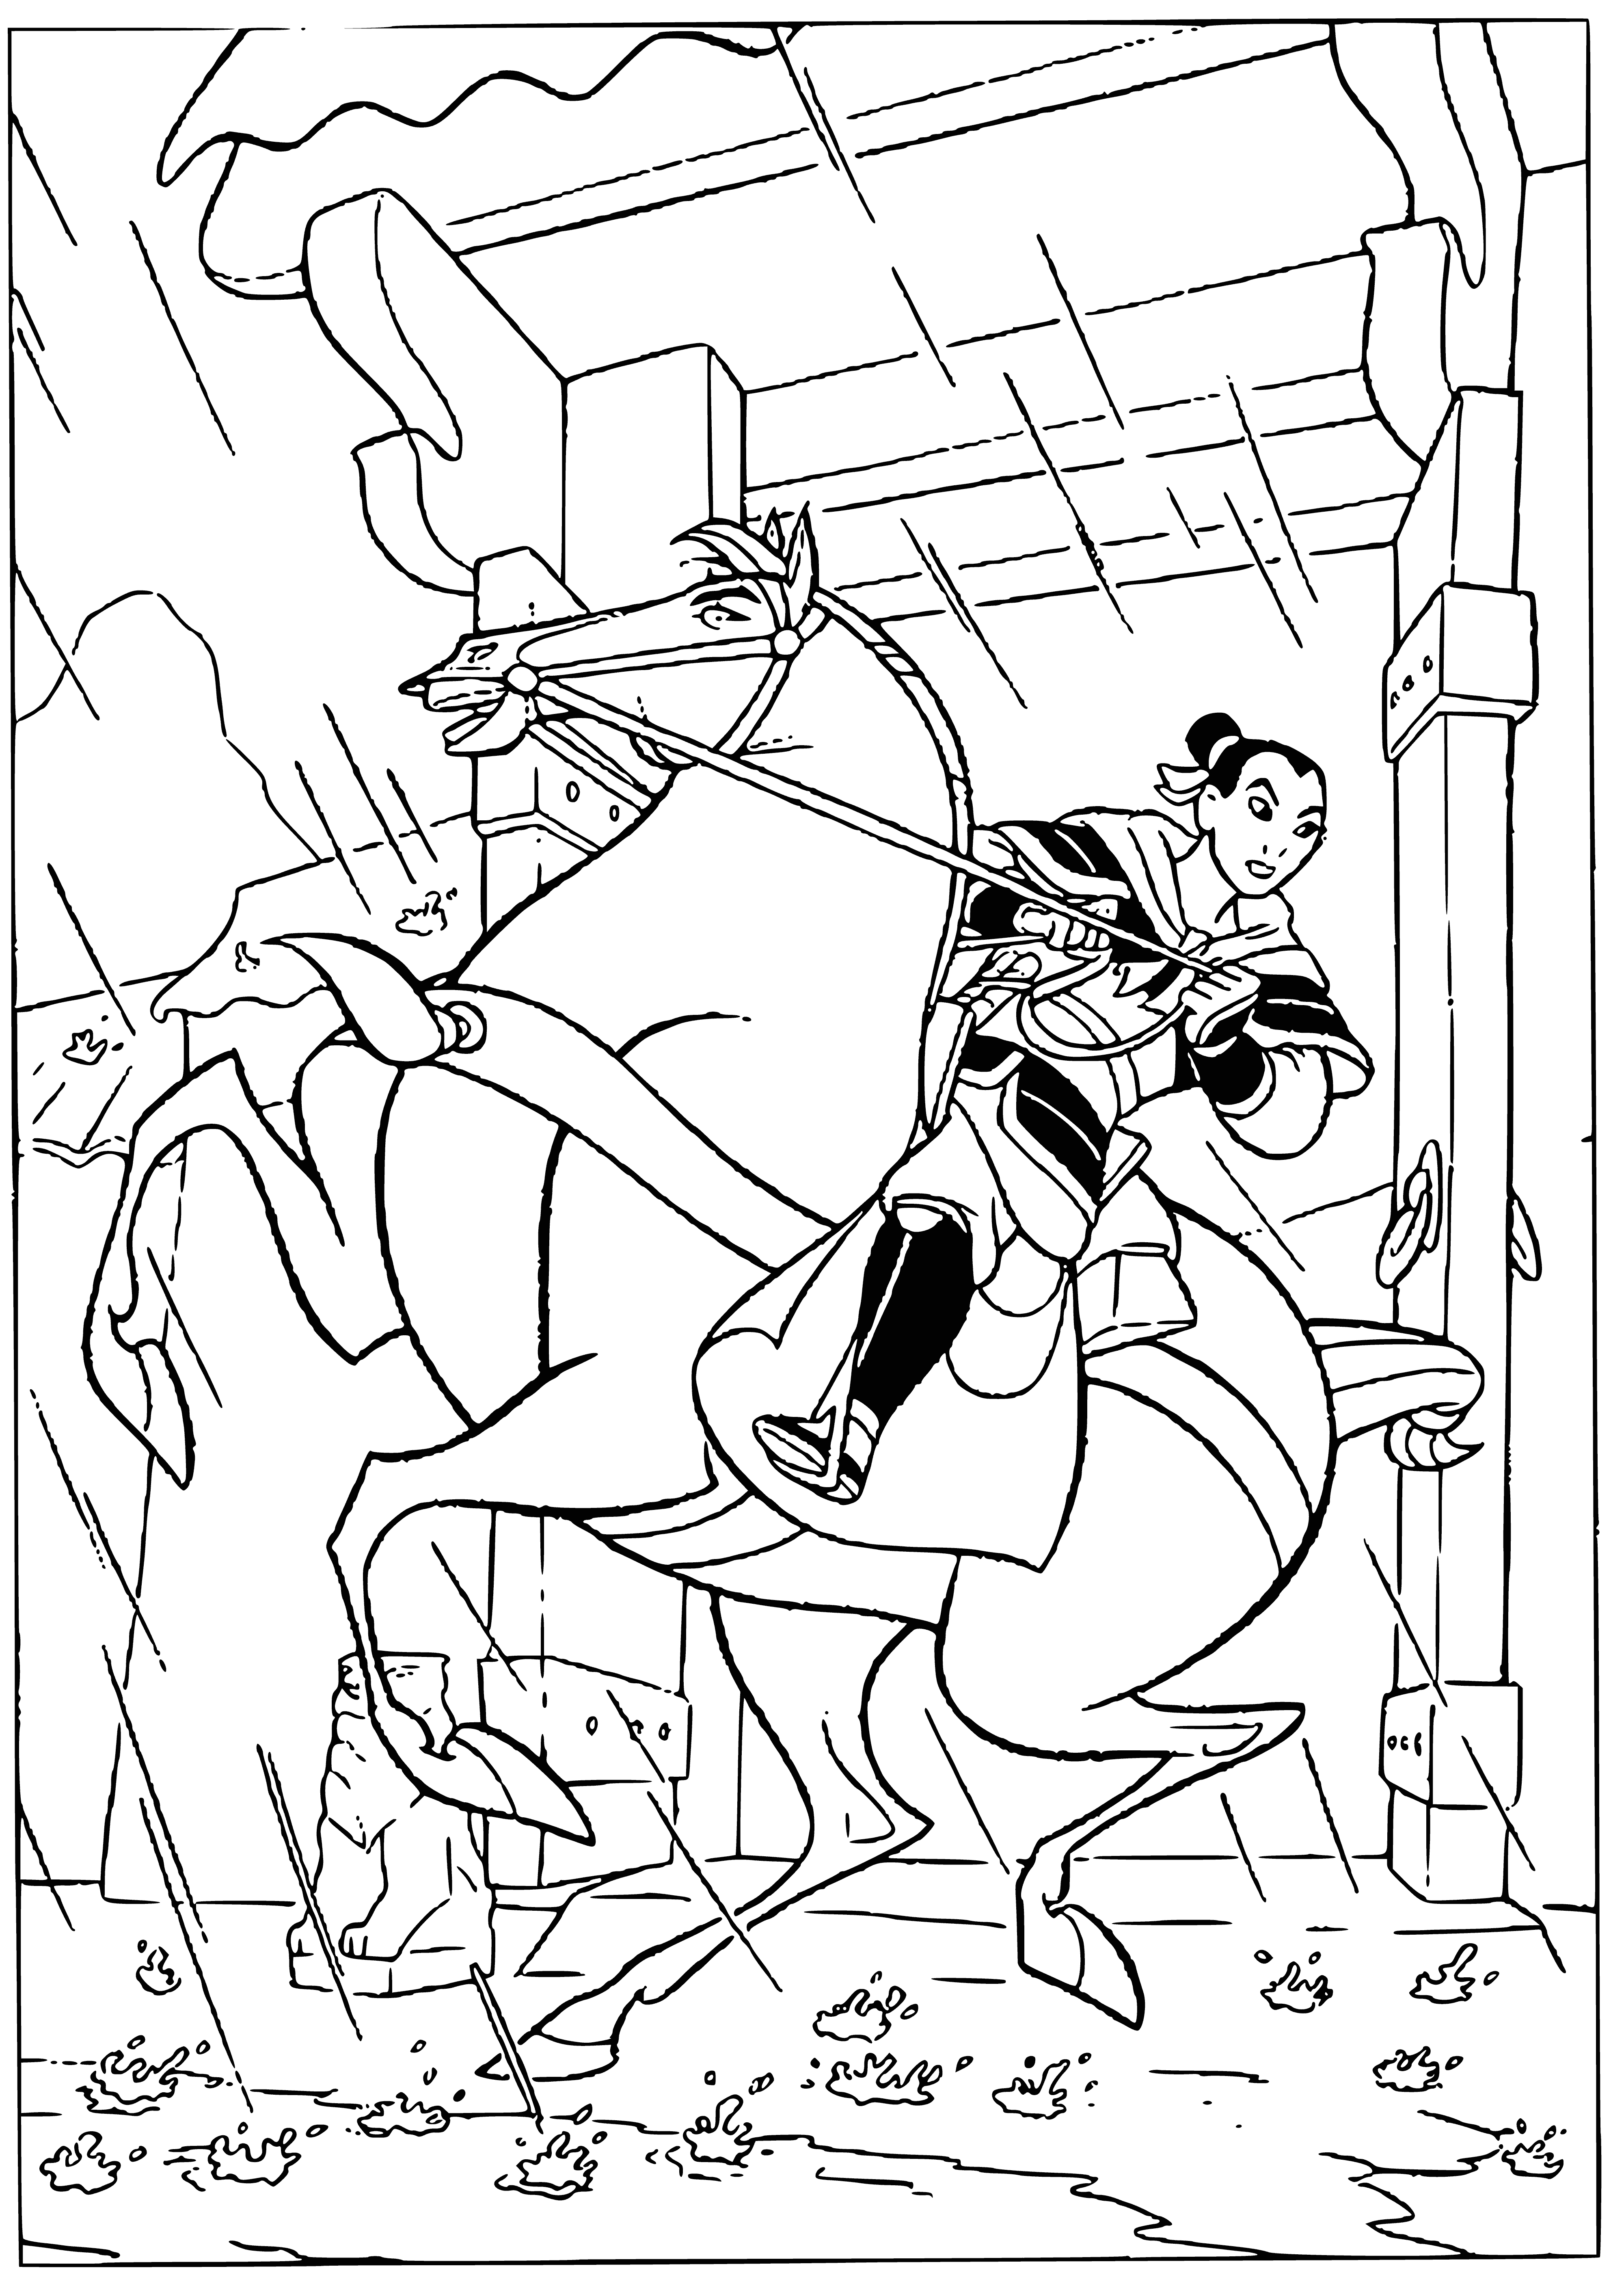 Mulan in battle coloring page